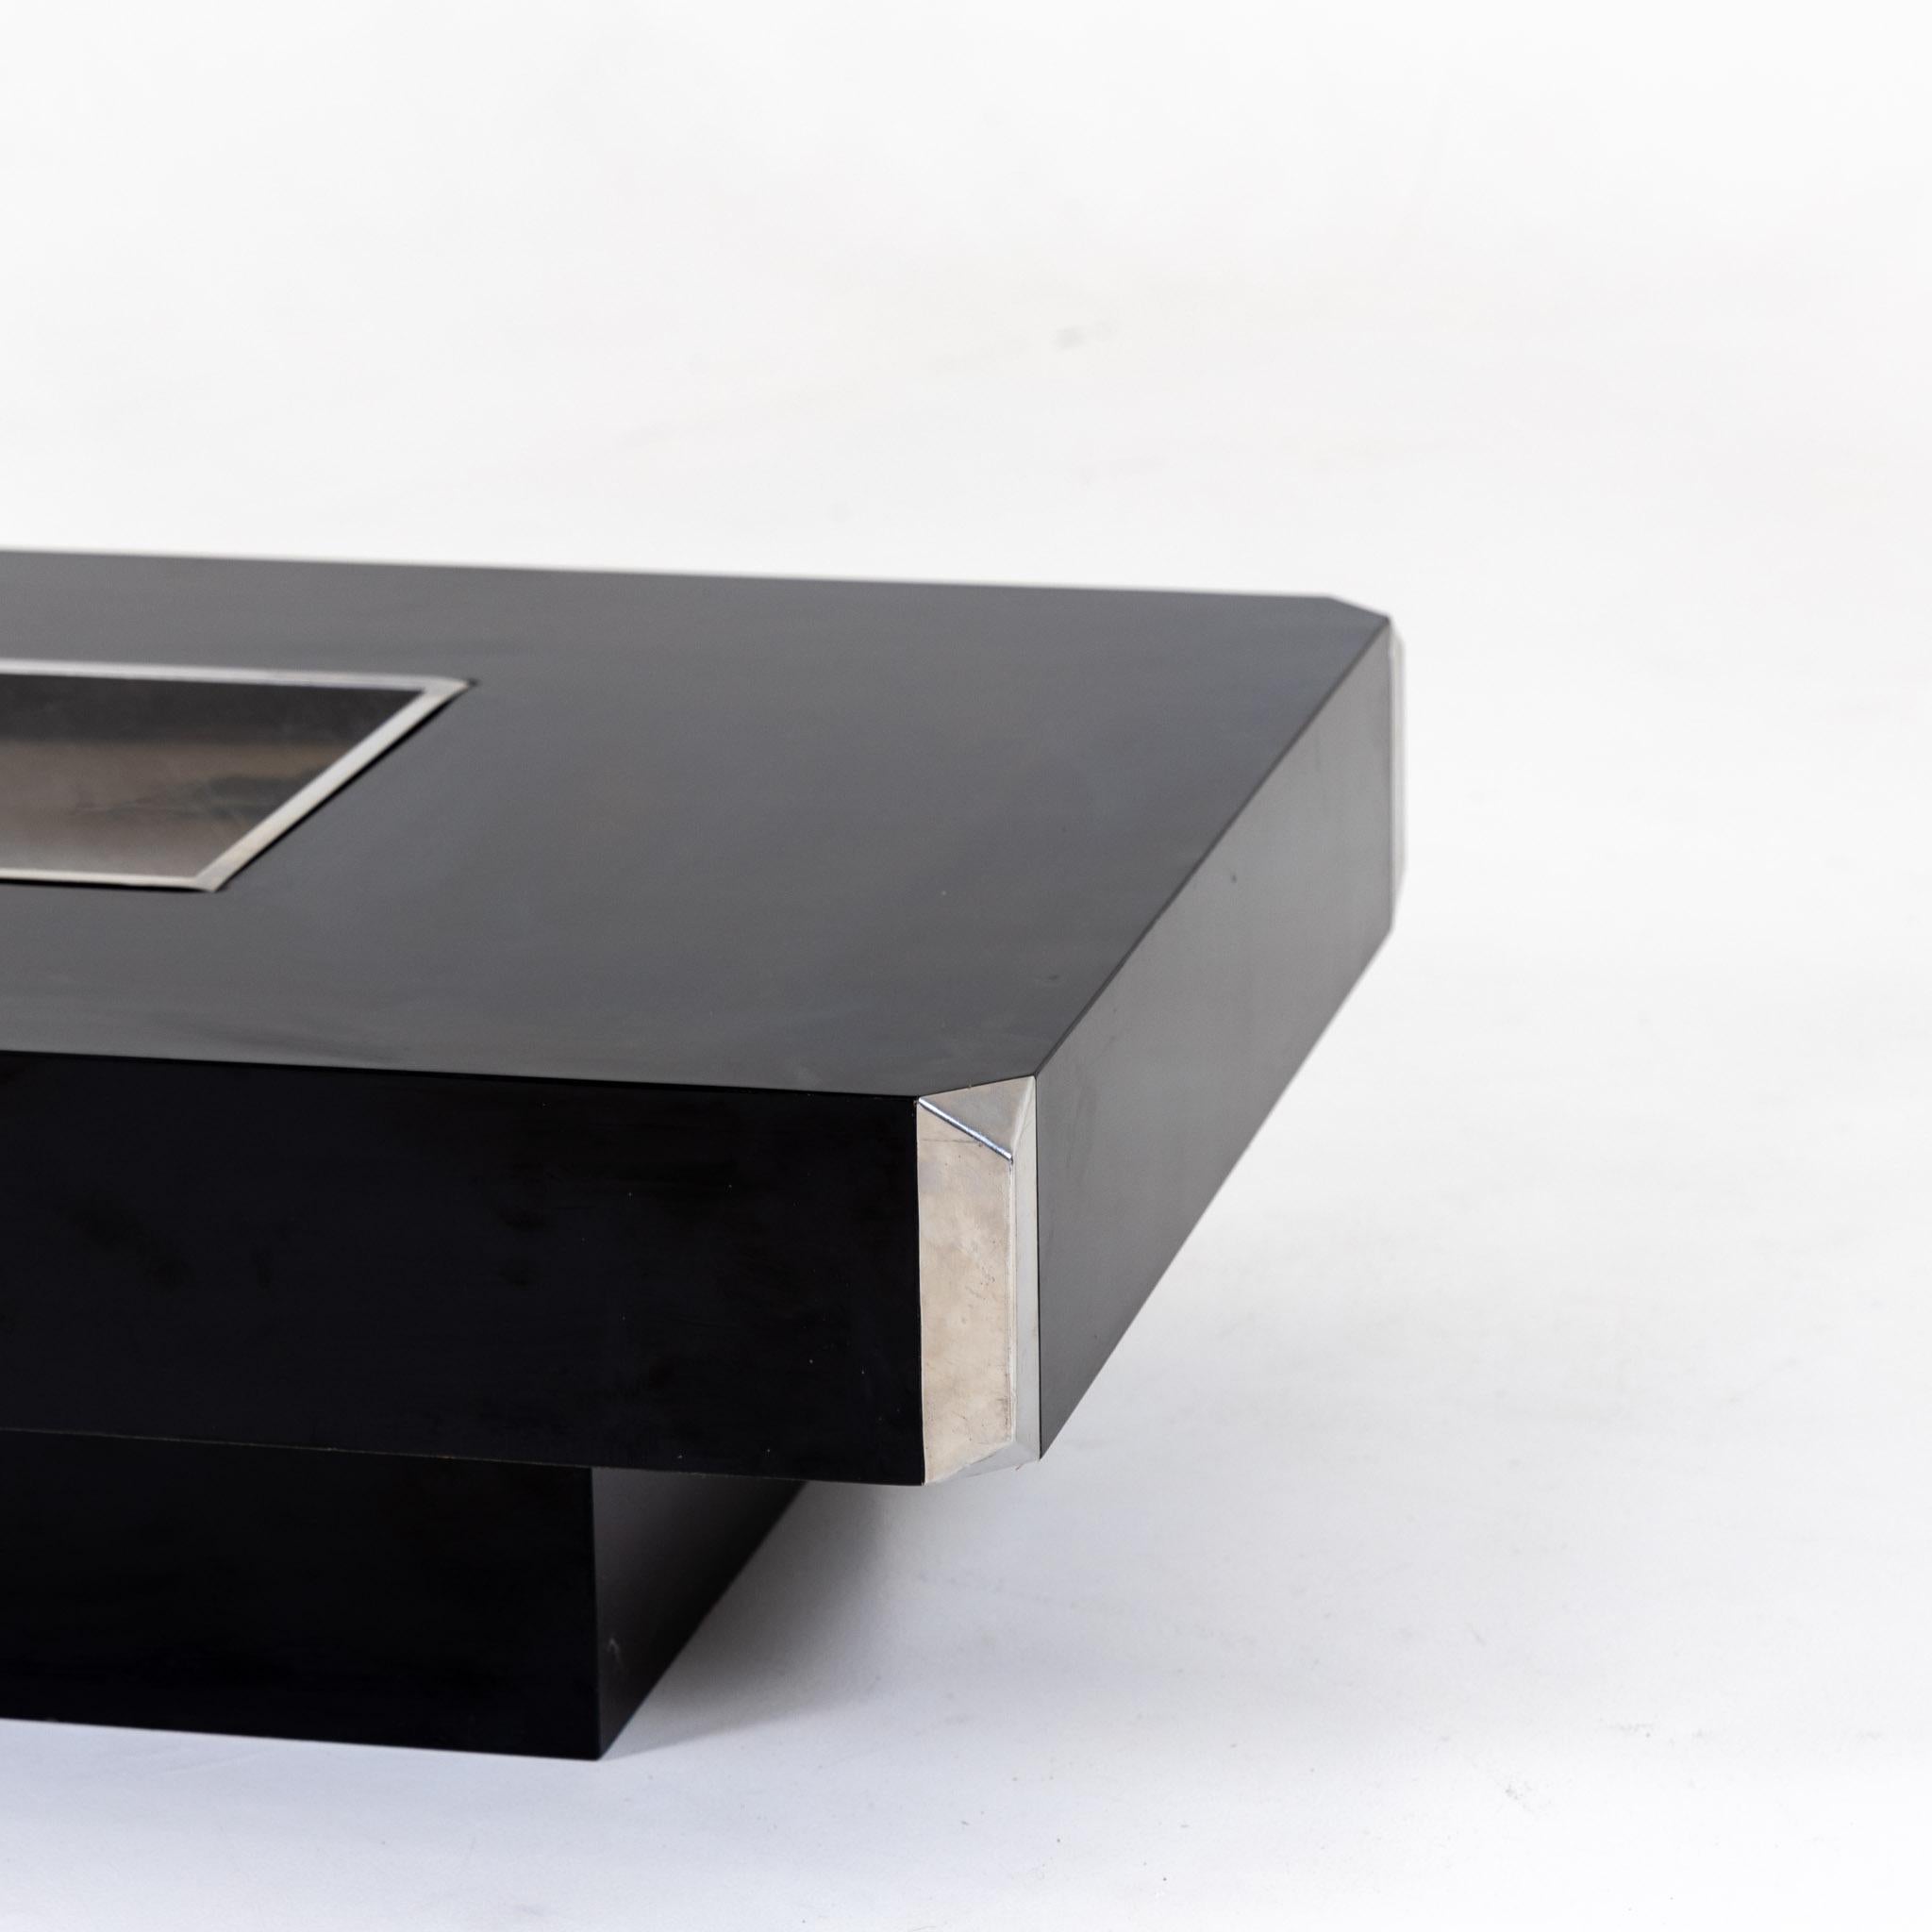 Late 20th Century Black Coffee Table Alveo with stainless steel basin by Willy Rizzo, Italy 1970s